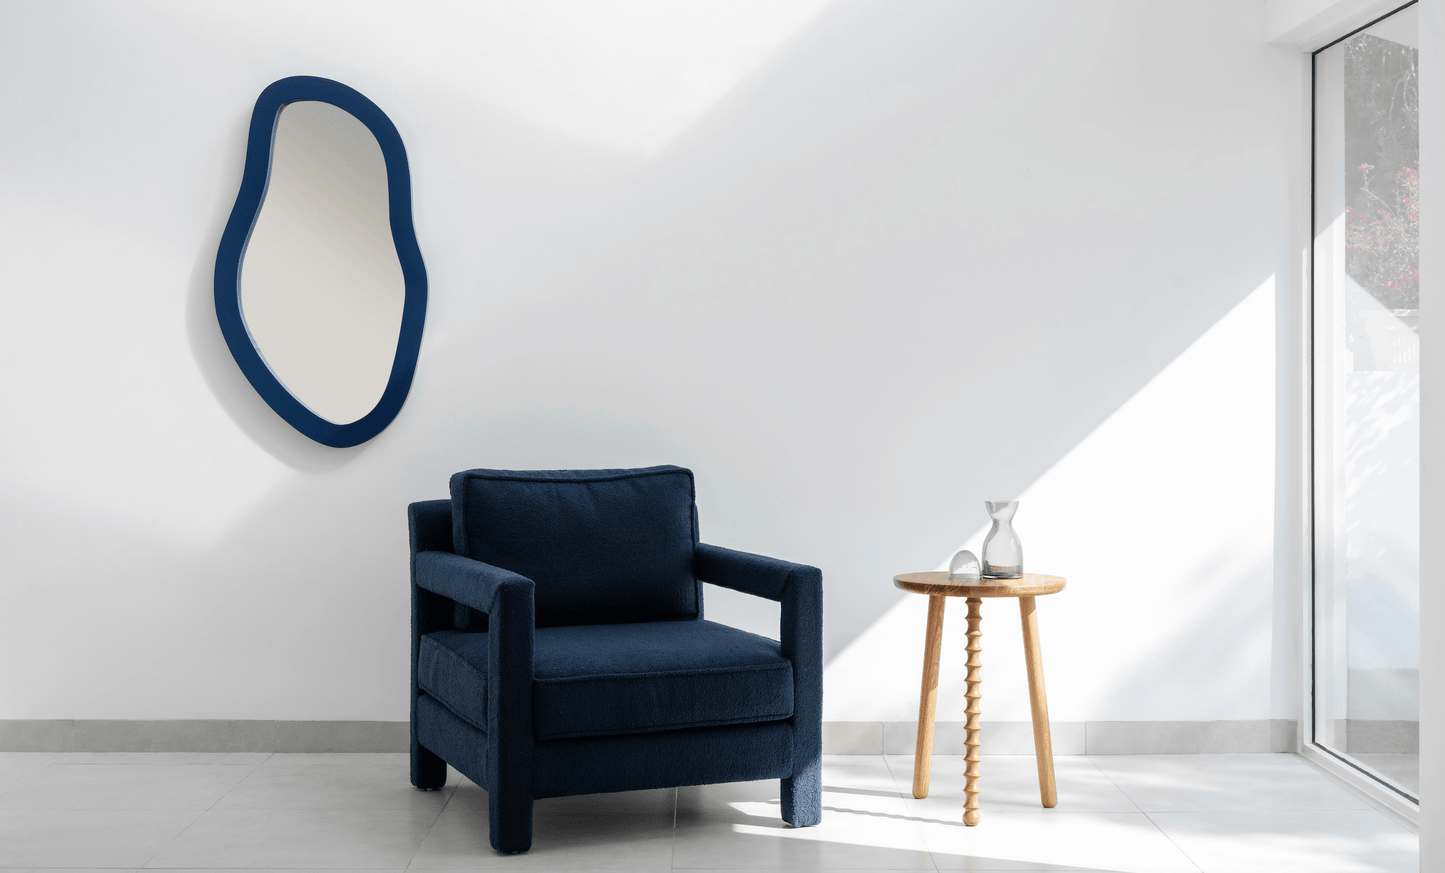 The Agnes Long Mirror